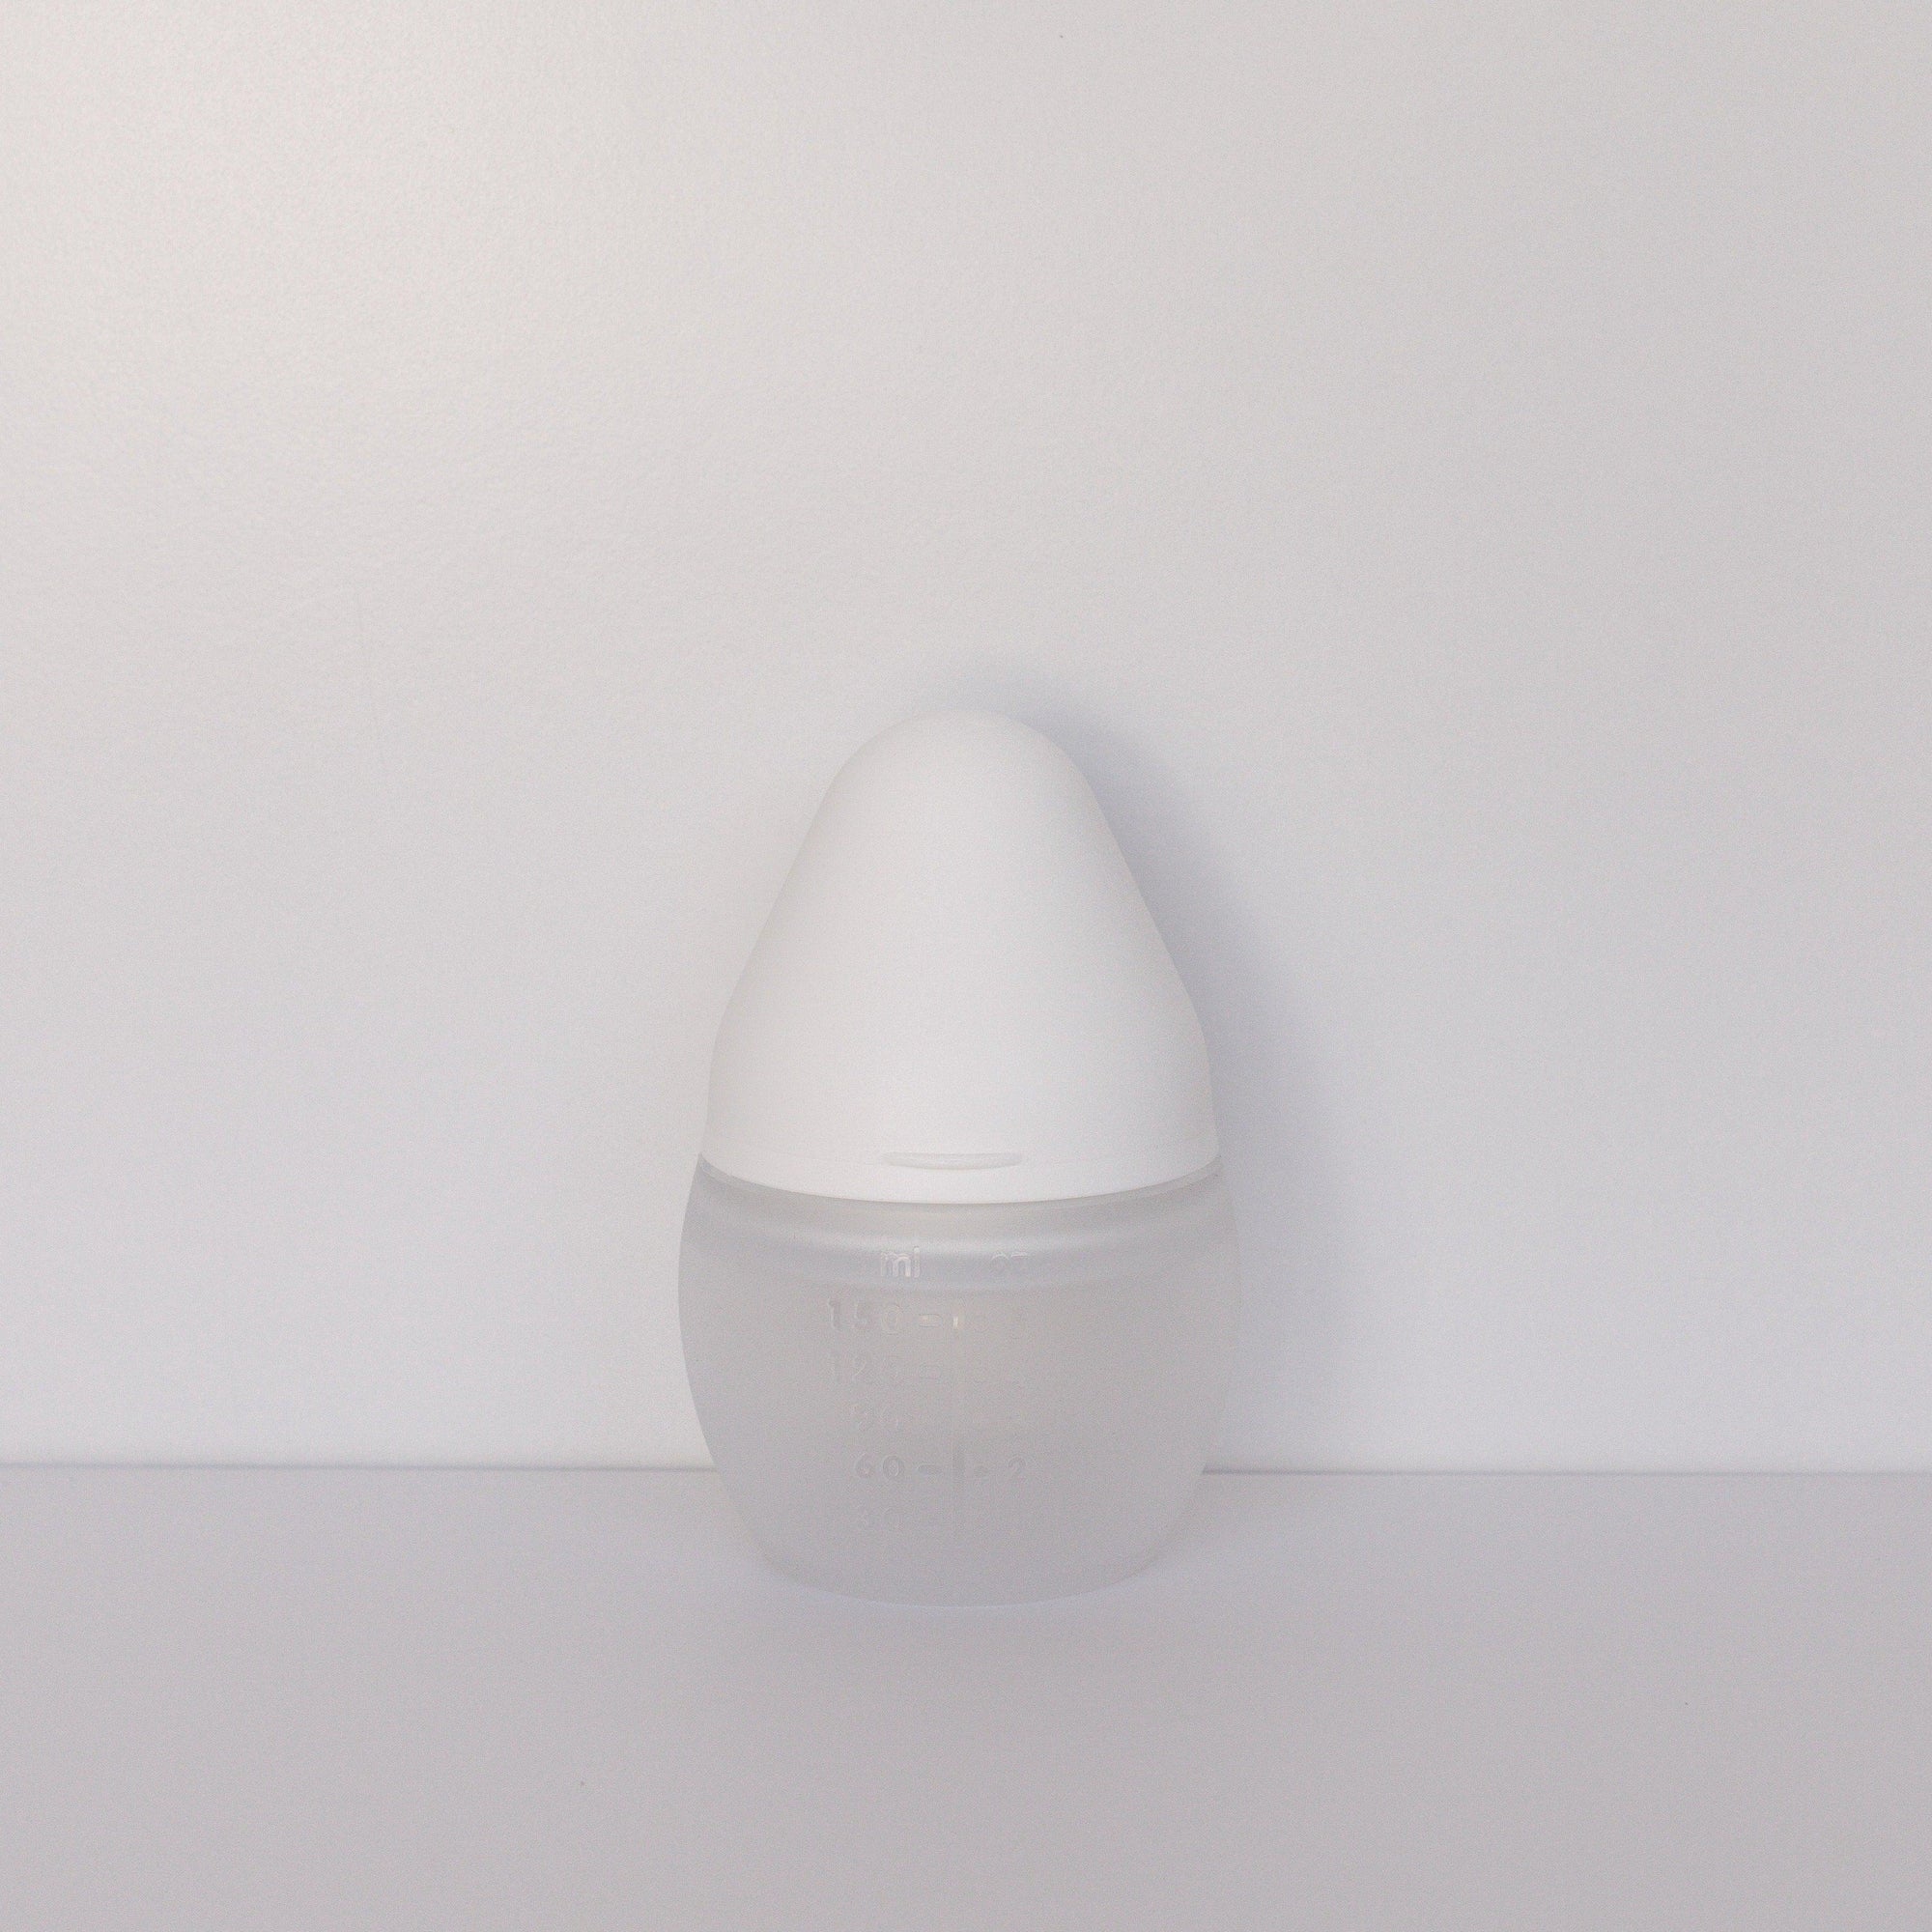 A milk BibRond bottle by Elhée France standing against a white surface.